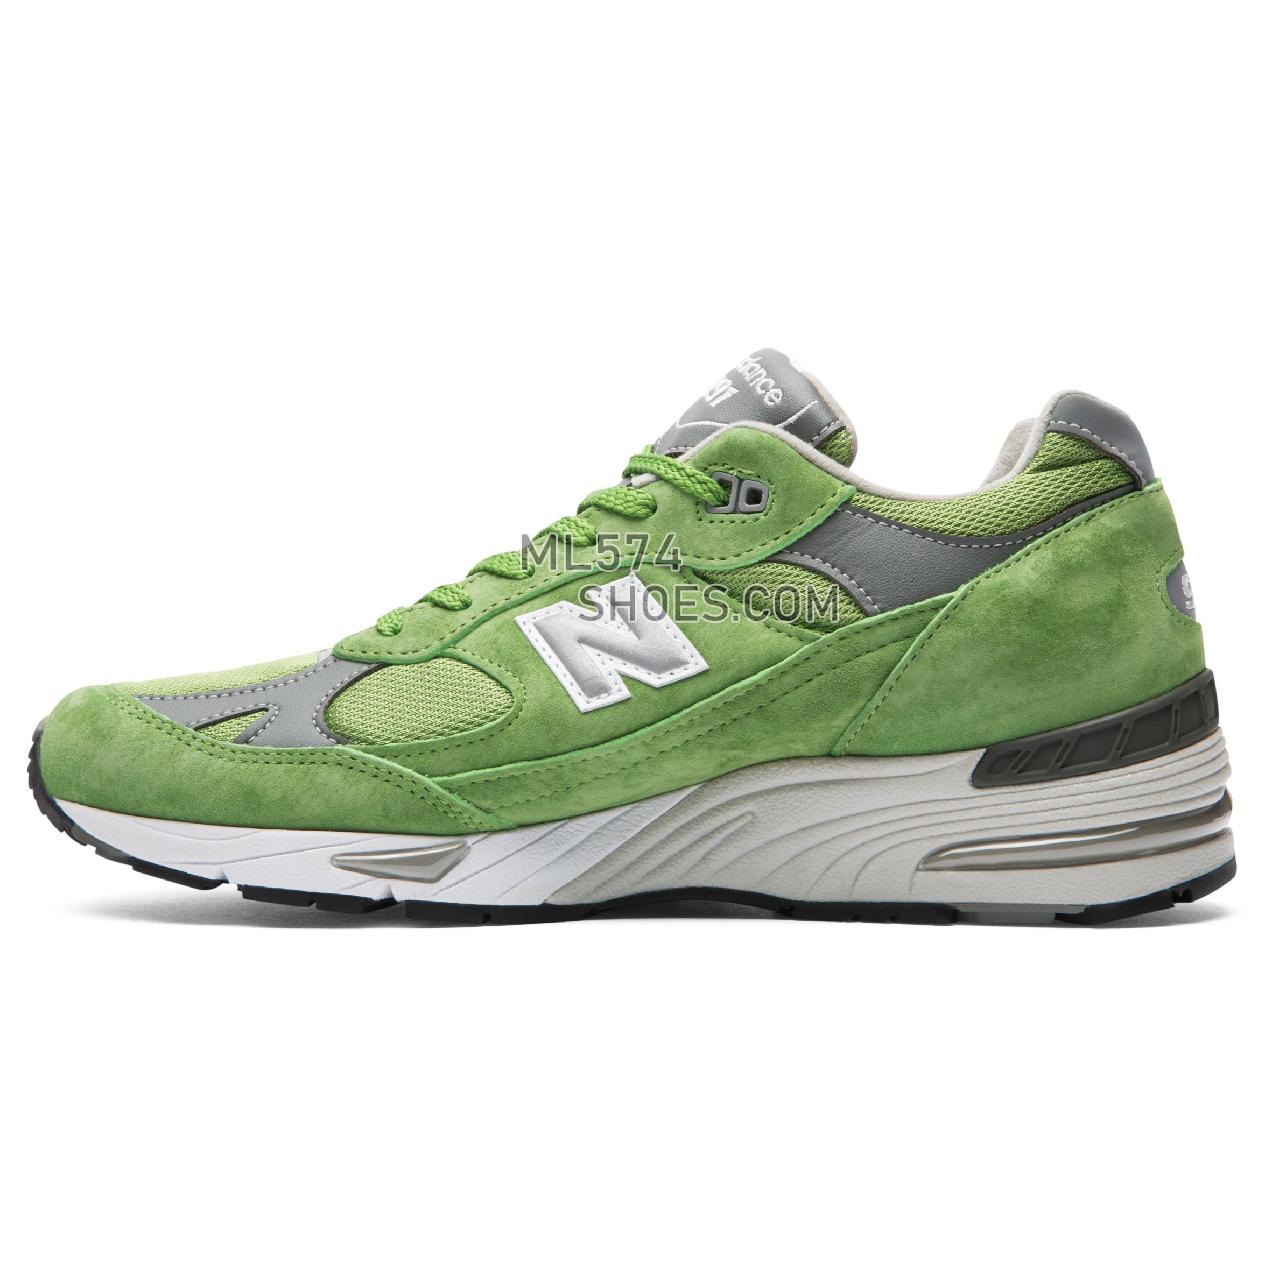 New Balance Made in UK 991 - Men's Made in UK 991 ML991V1-23760-M - Green with Grey and White - M991GRN